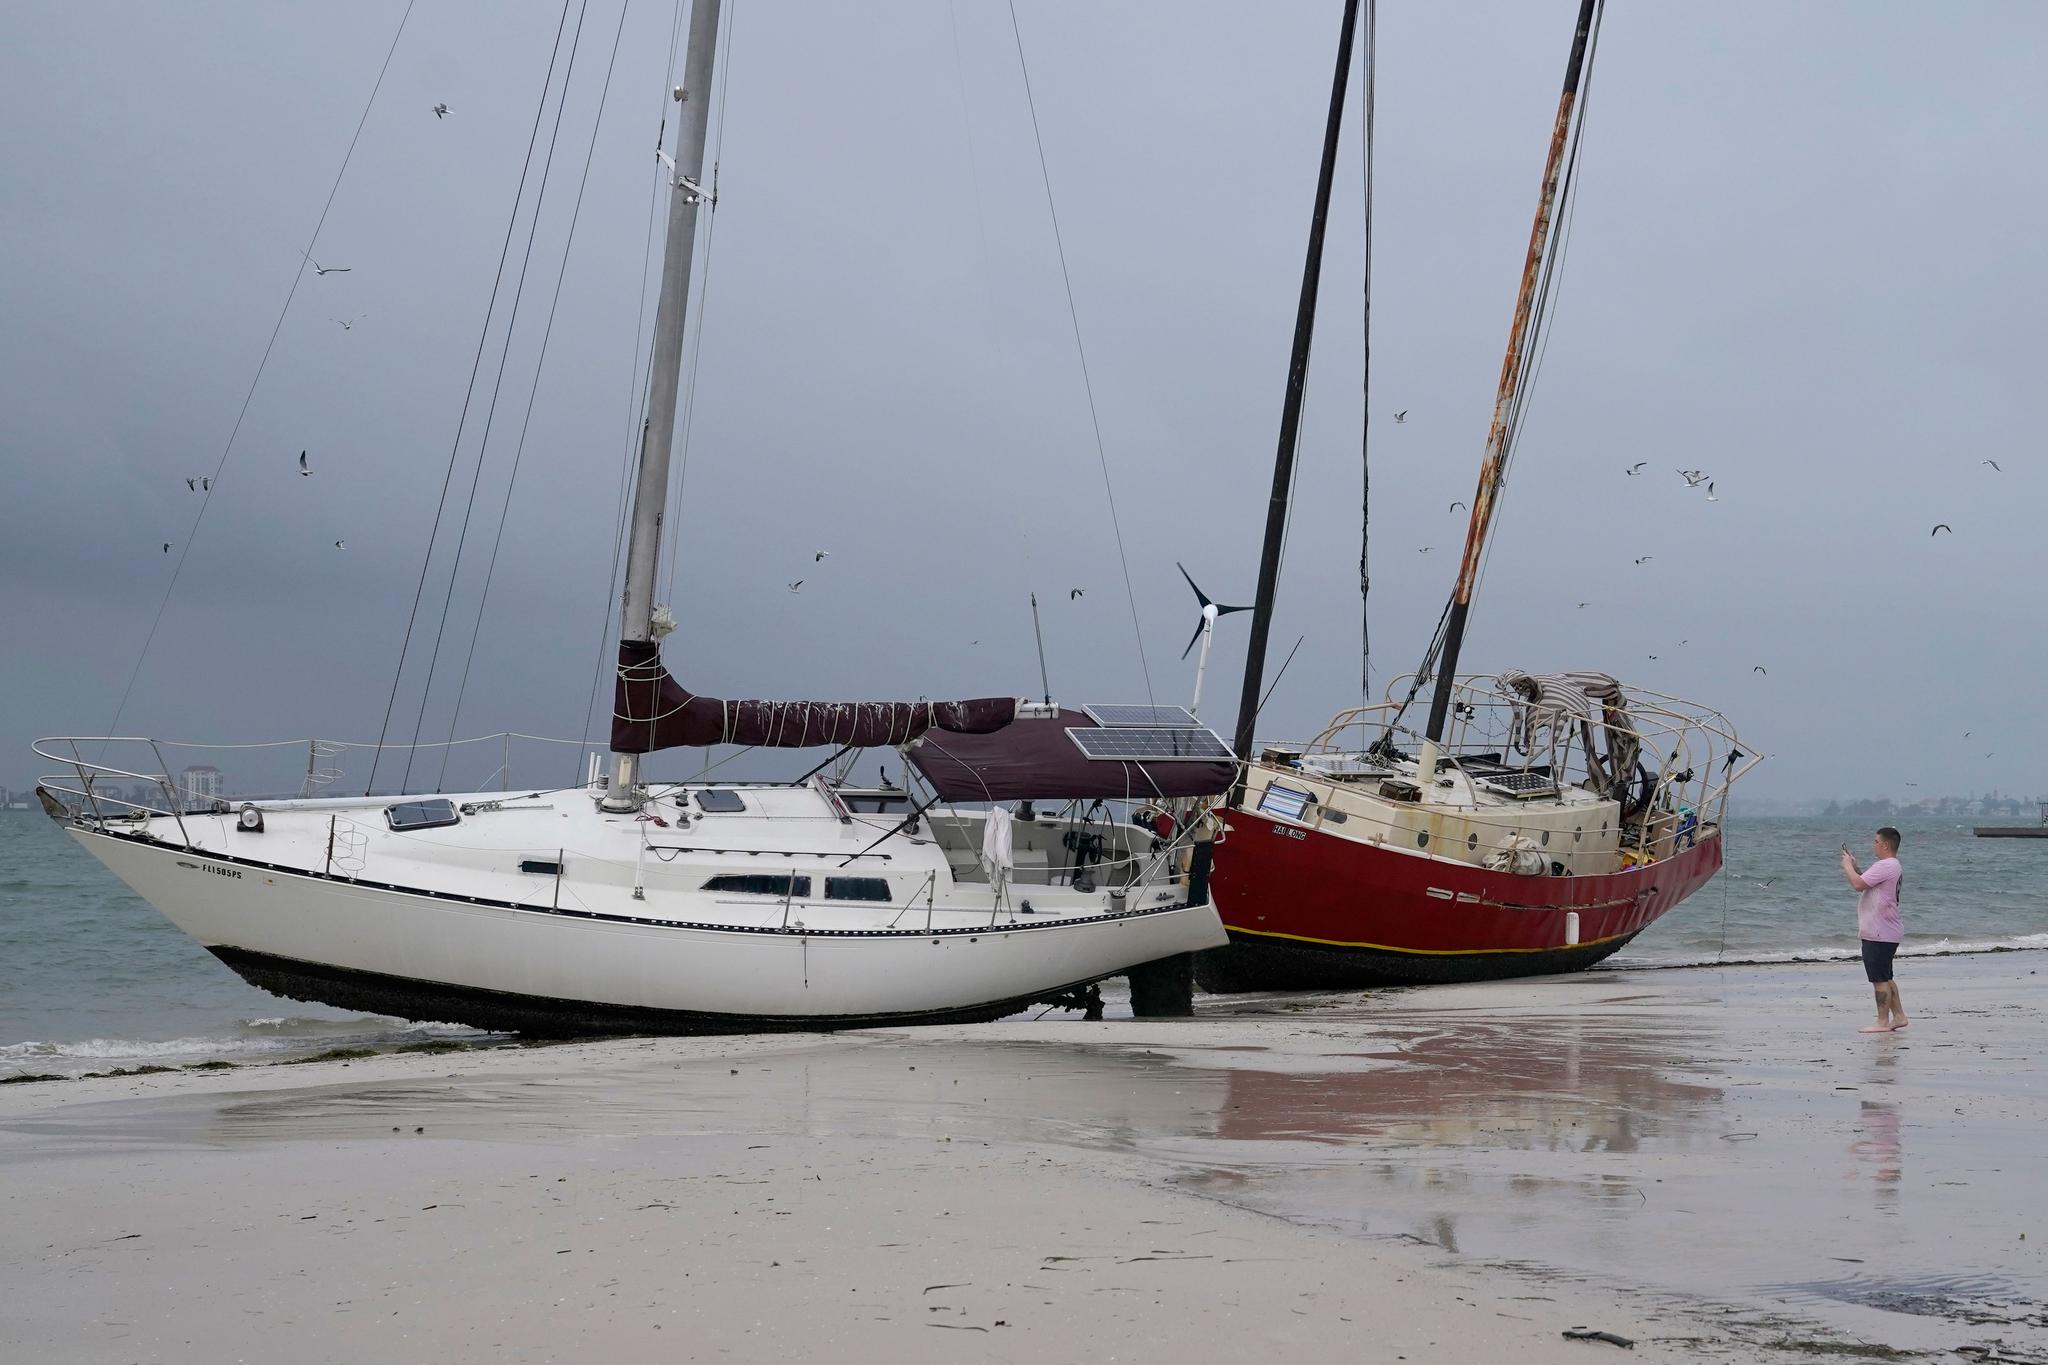 Boats sit on the beach in the aftermath of Tropical Storm Eta